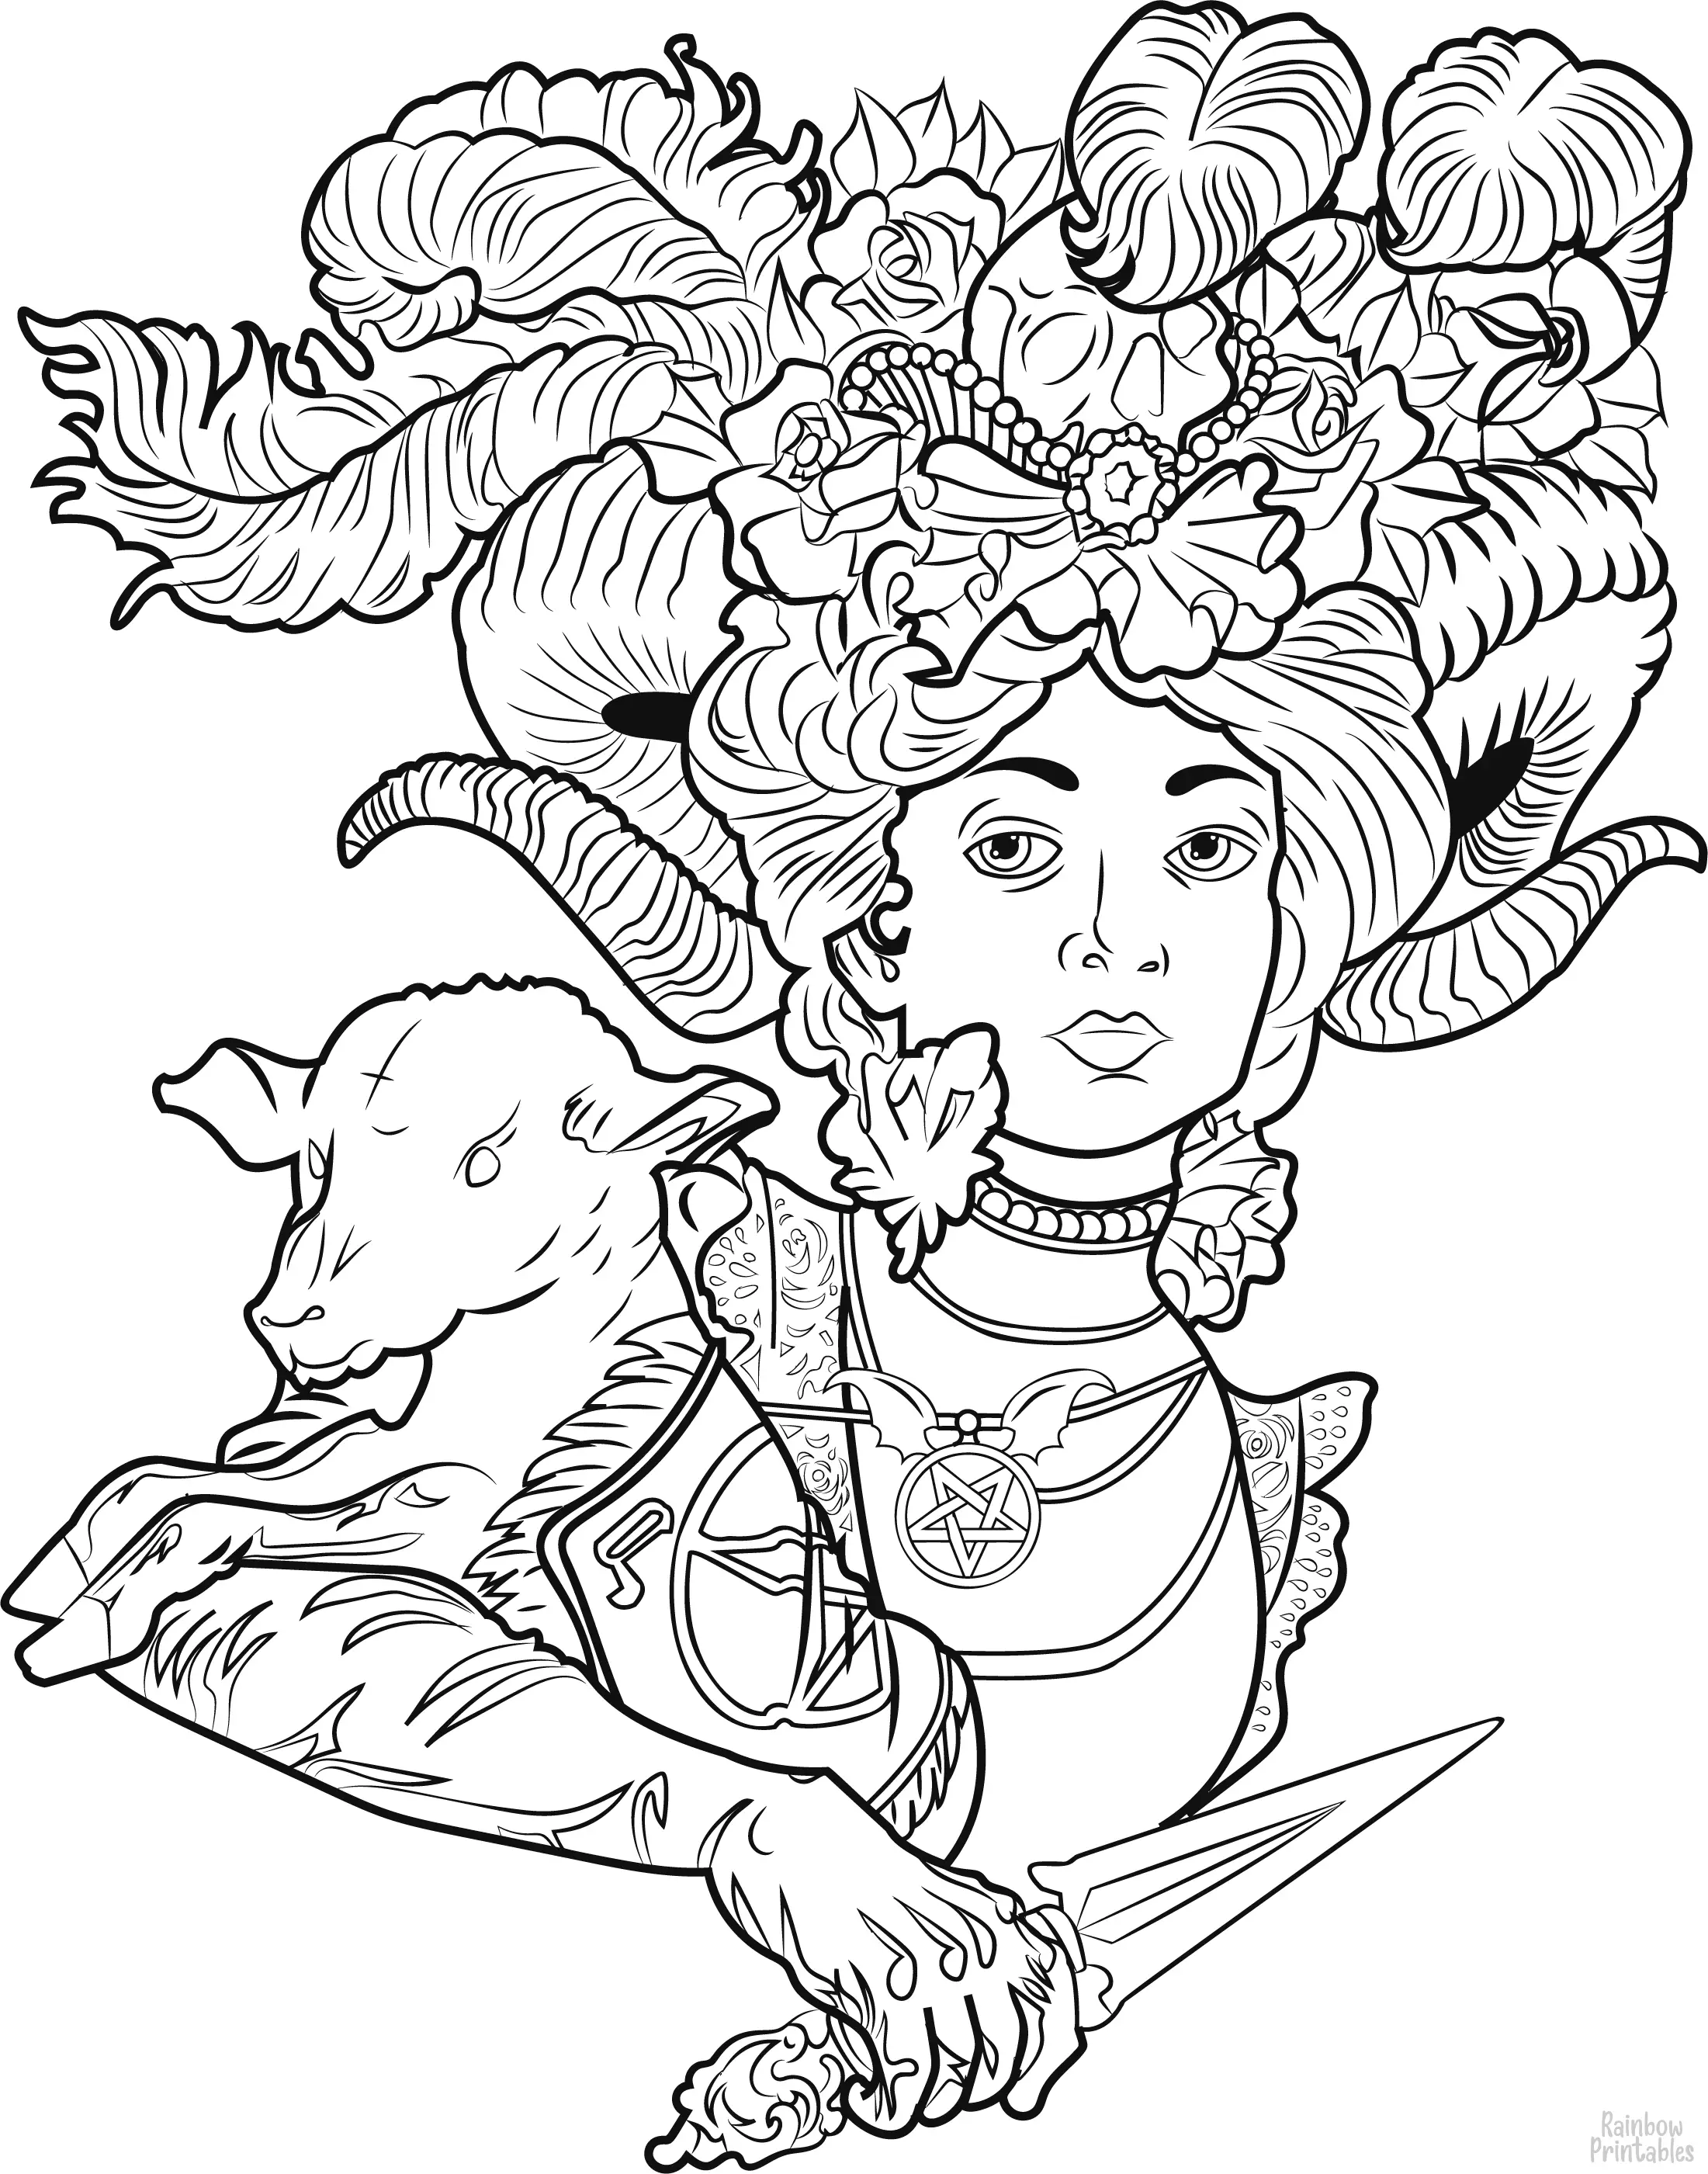 Fantasy Witch Pentagram Sorceress Demon Lady Coloring Page for Kids